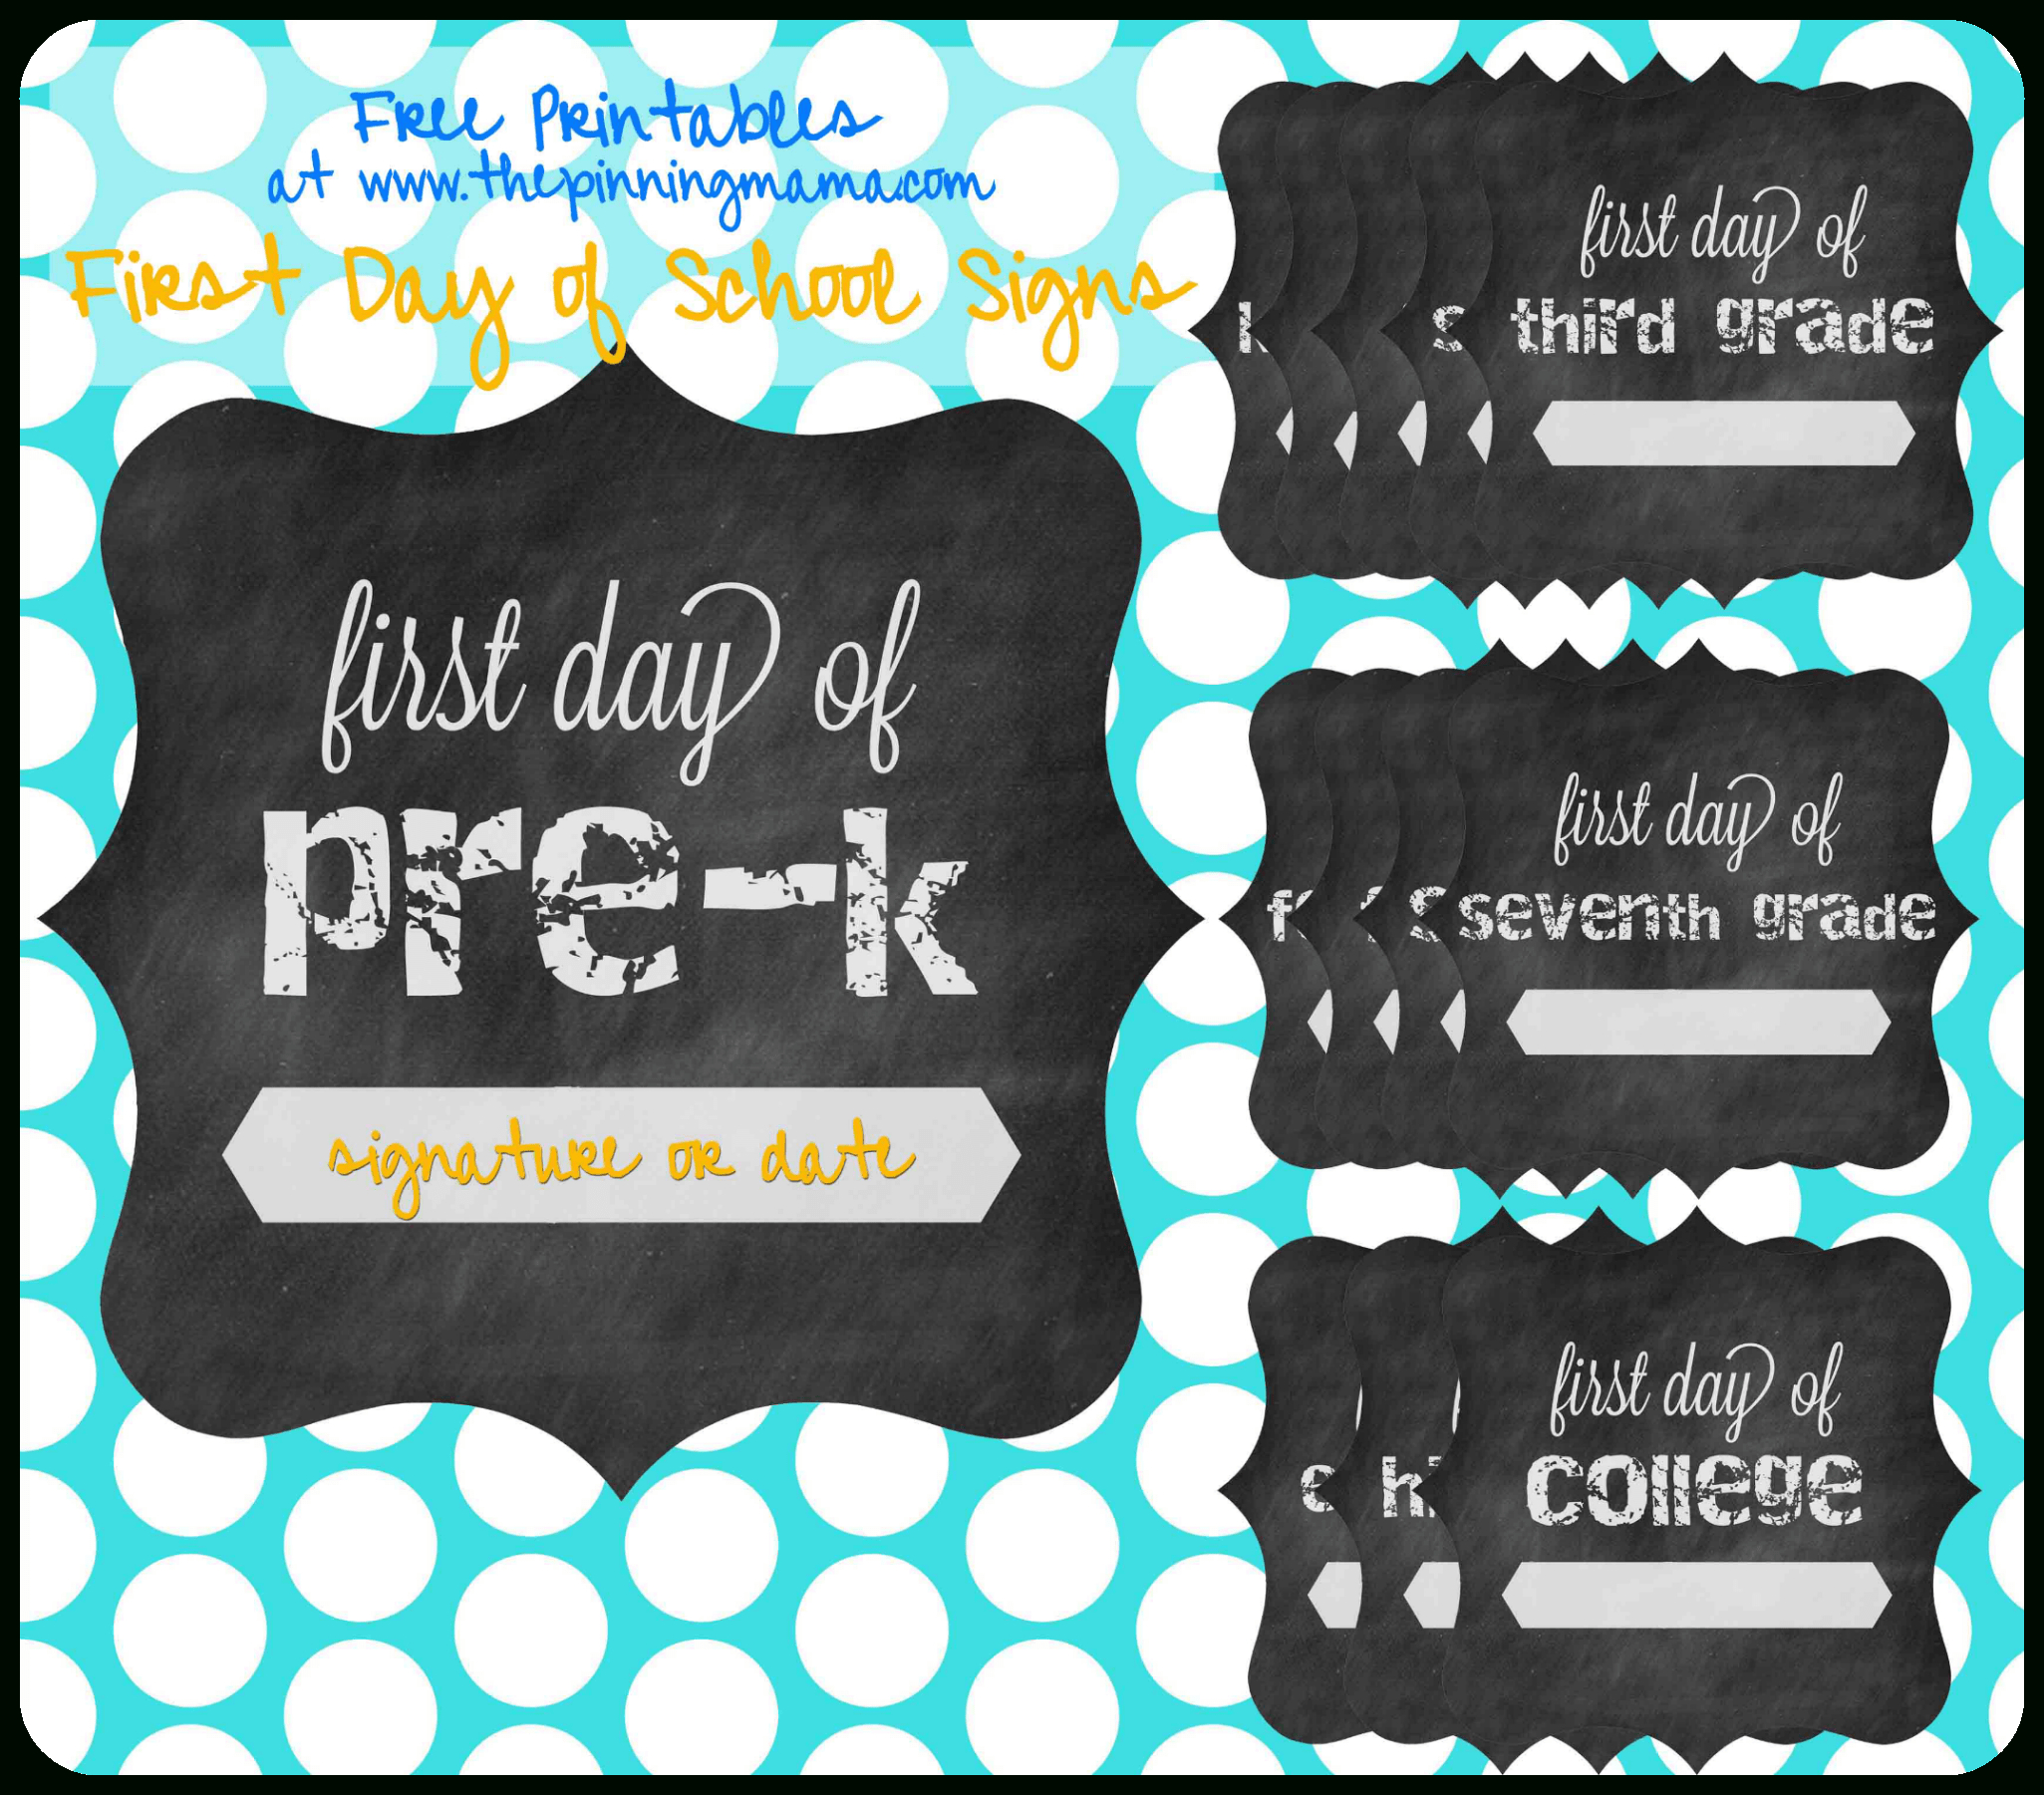 Free Printable} First Day Of School Chalkboard Sign • The Pinning Mama - Free First Day Of School Printables